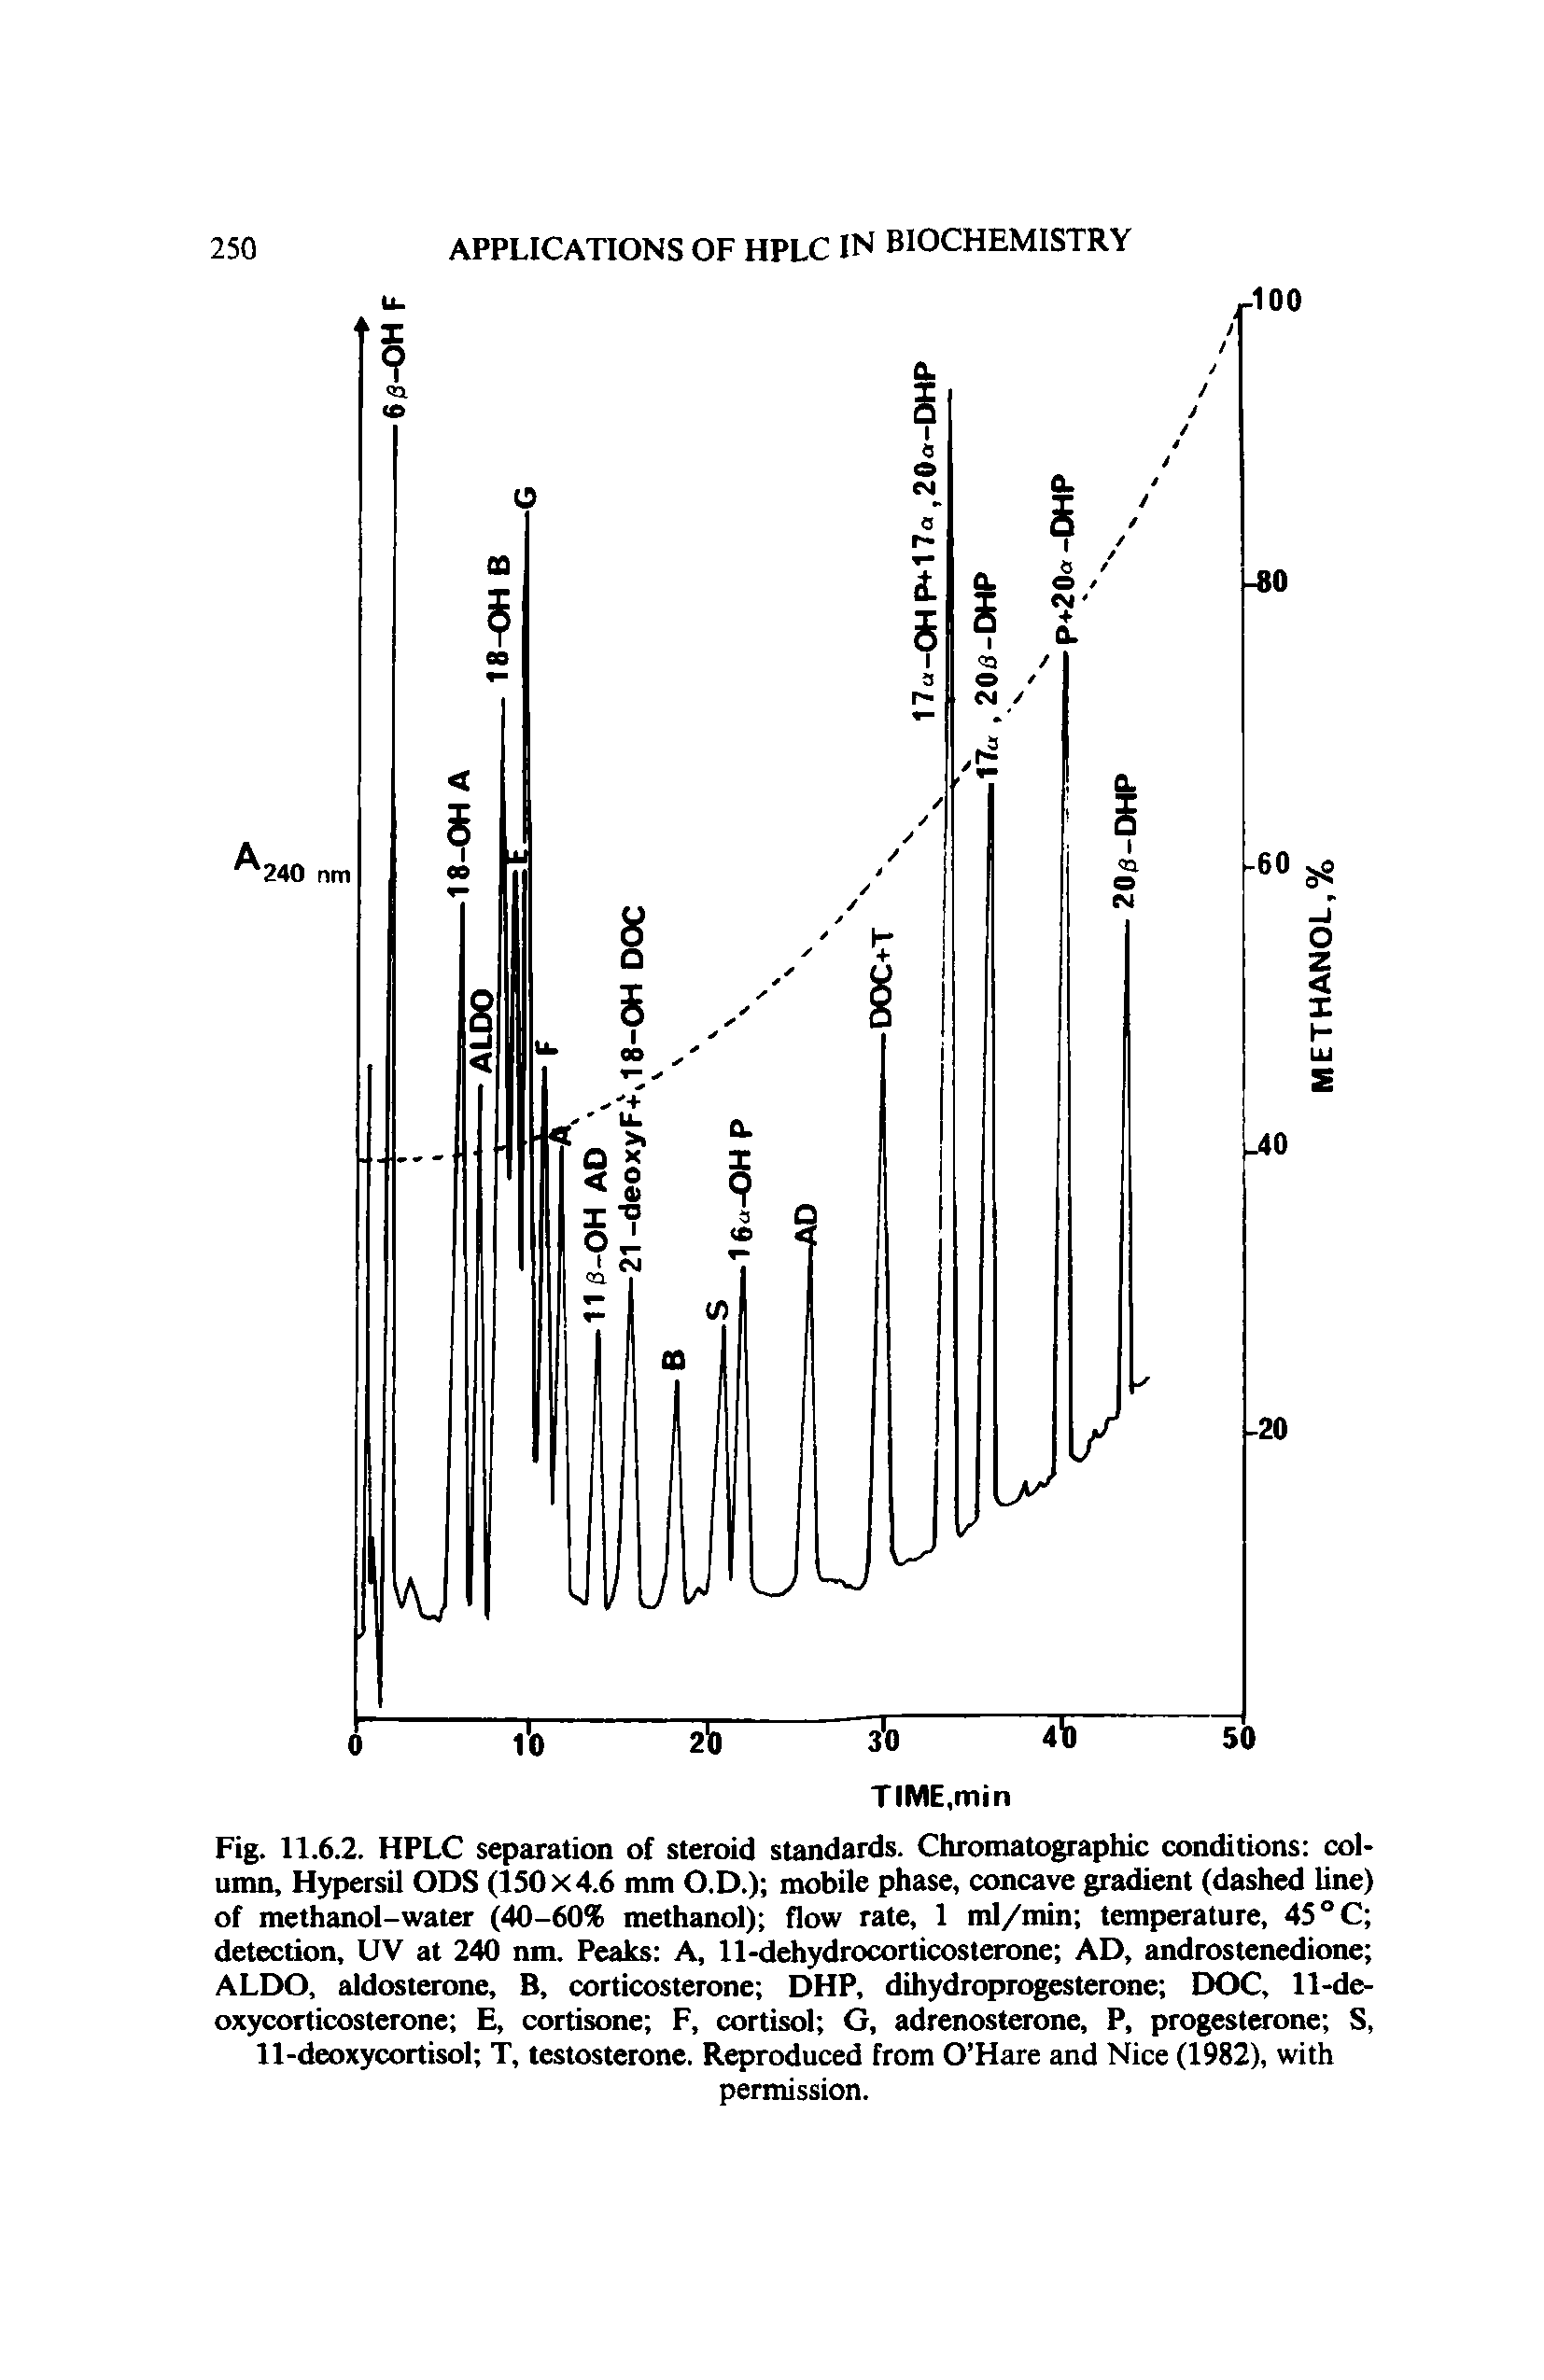 Fig. 11.6.2. HPLC separation of steroid standards. Chromatographic conditions column, Hypersil ODS (150x4.6 mm O.D.) mobile phase, concave gradient (dashed line) of methanol-water (40-60% methanol) flow rate, 1 ml/min temperature, 45 °C detection, UV at 240 nm. Peaks A, 11-dehydrocorticosterone AD, androstenedione ALDO, aldosterone, B, corticosterone DHP, dihydroprogesterone DOC, 11-deoxycorticosterone E, cortisone F, cortisol G, adrenosterone, P, progesterone S, 11-deoxycortisol T, testosterone. Reproduced from O Hare and Nice (1982), with...